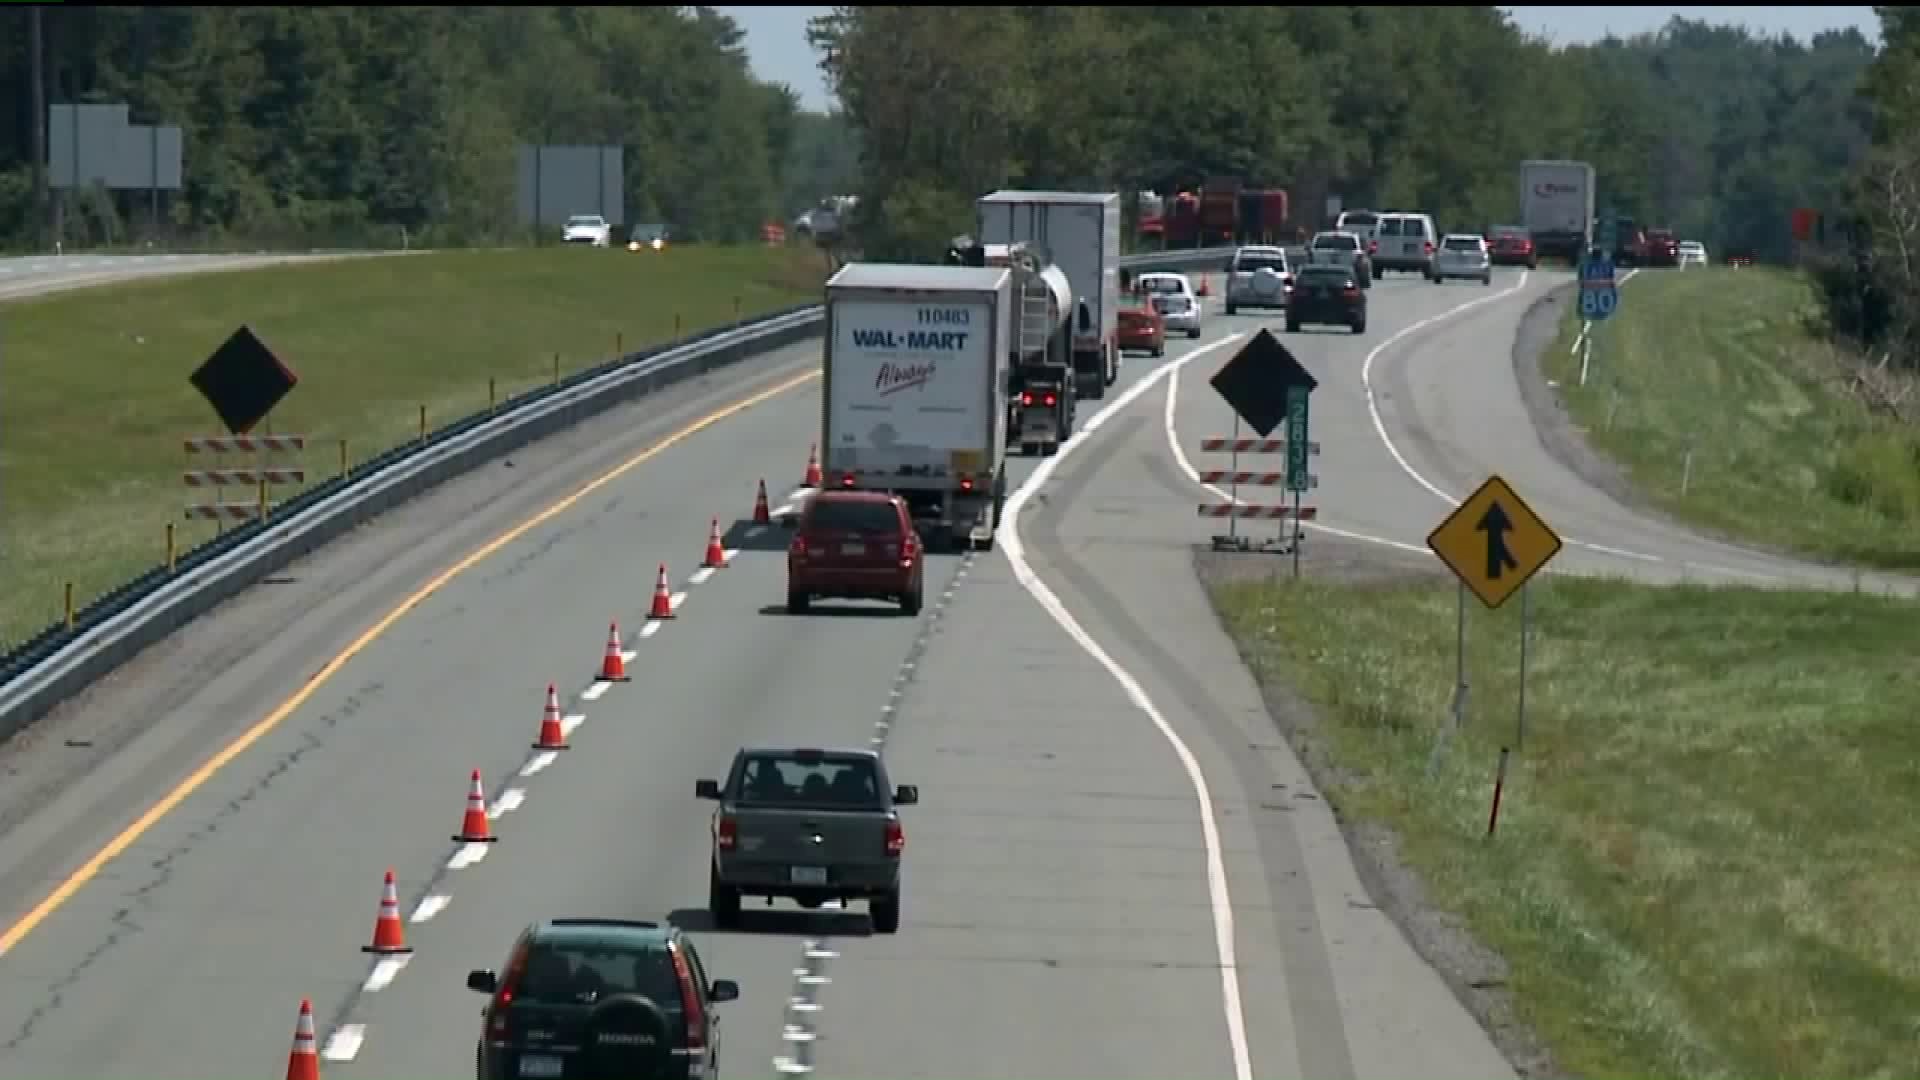 Construction Project Begins on I-80 East in the Poconos